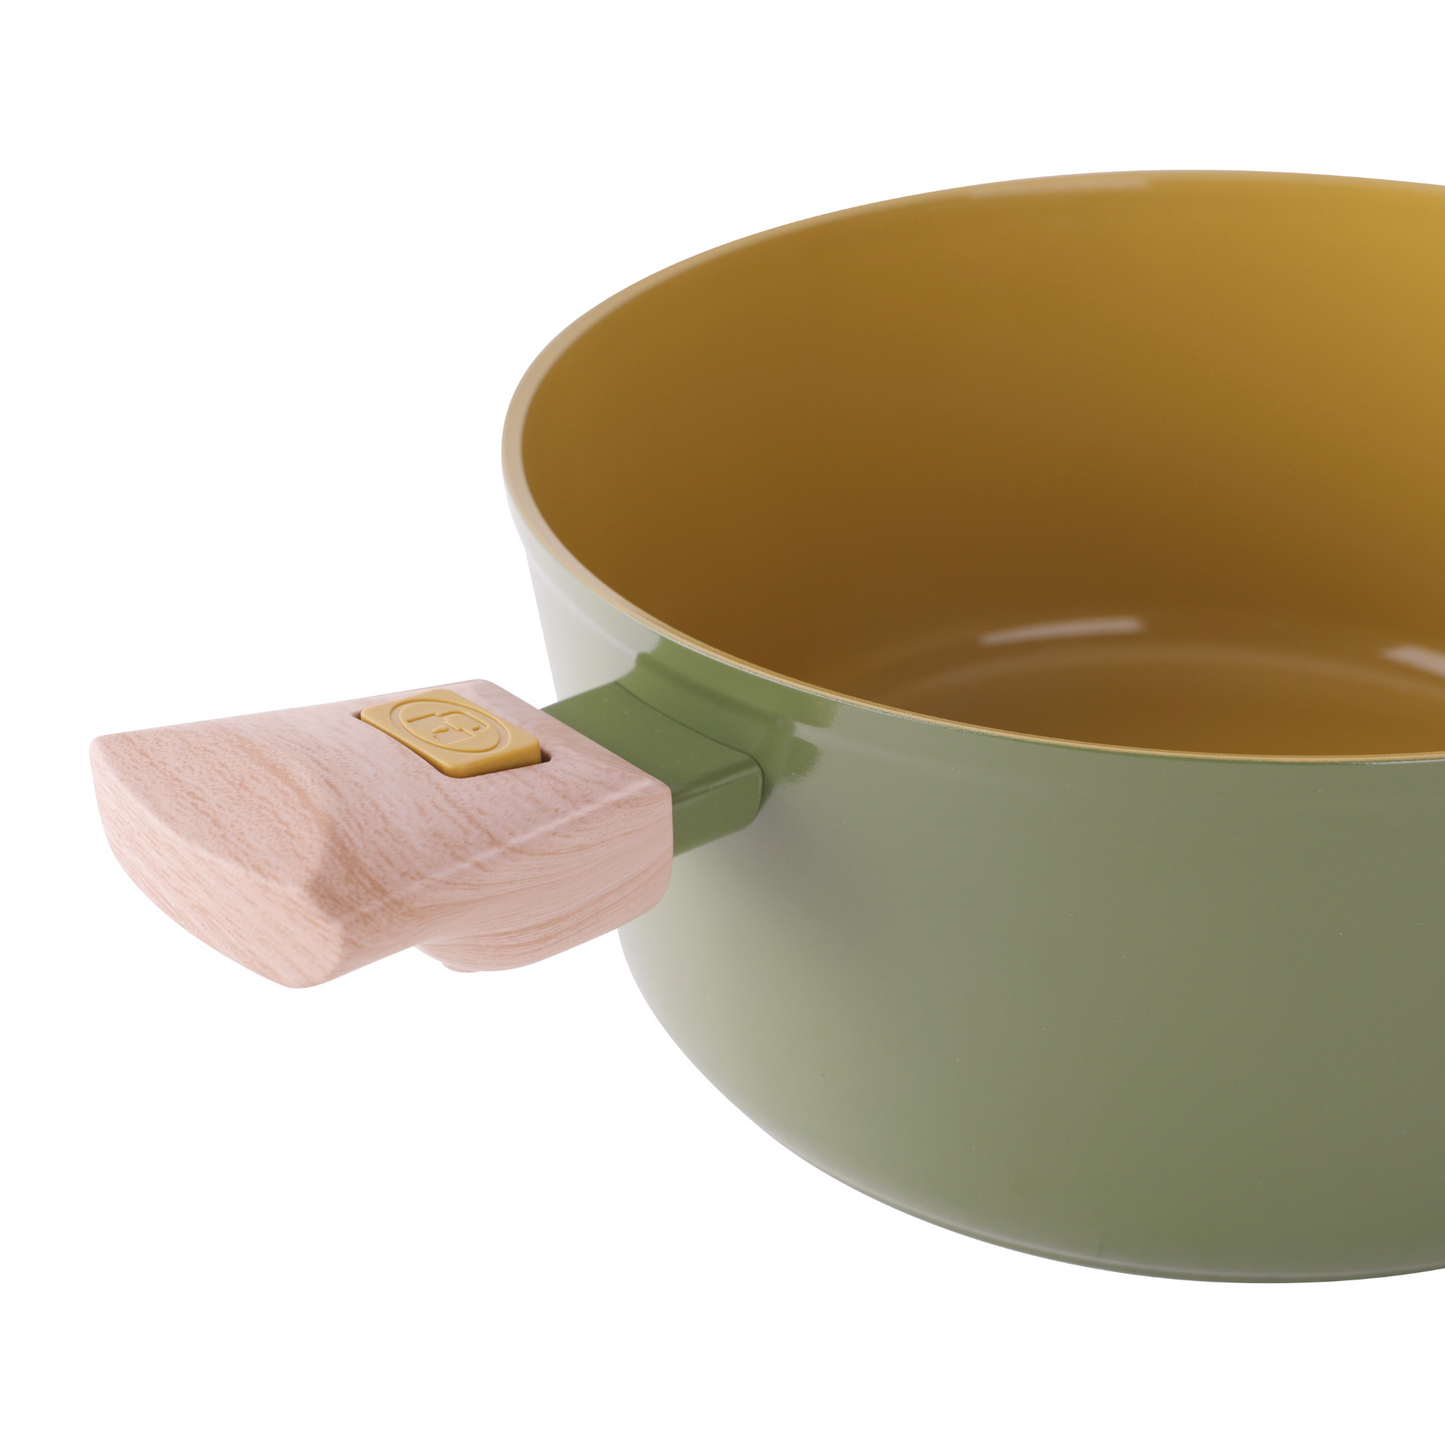 AmVegan saucepan with removable handles, suitable for oven and all types of cookers, including induction 